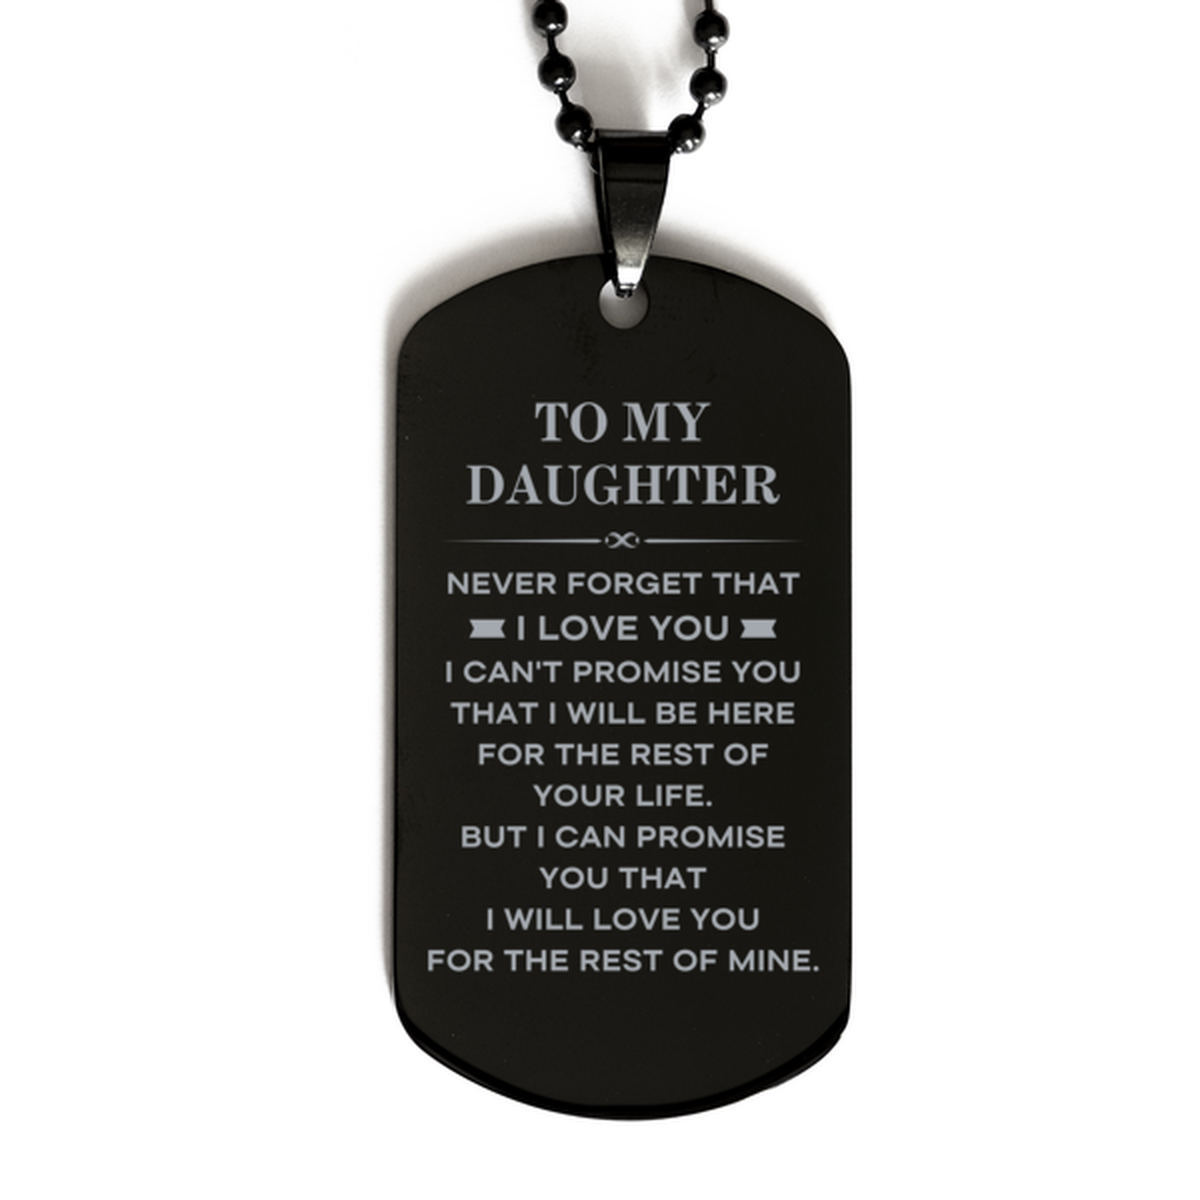 To My Daughter Gifts, I will love you for the rest of mine, Love Daughter Dog Tag Necklace, Birthday Christmas Unique Black Dog Tag For Daughter